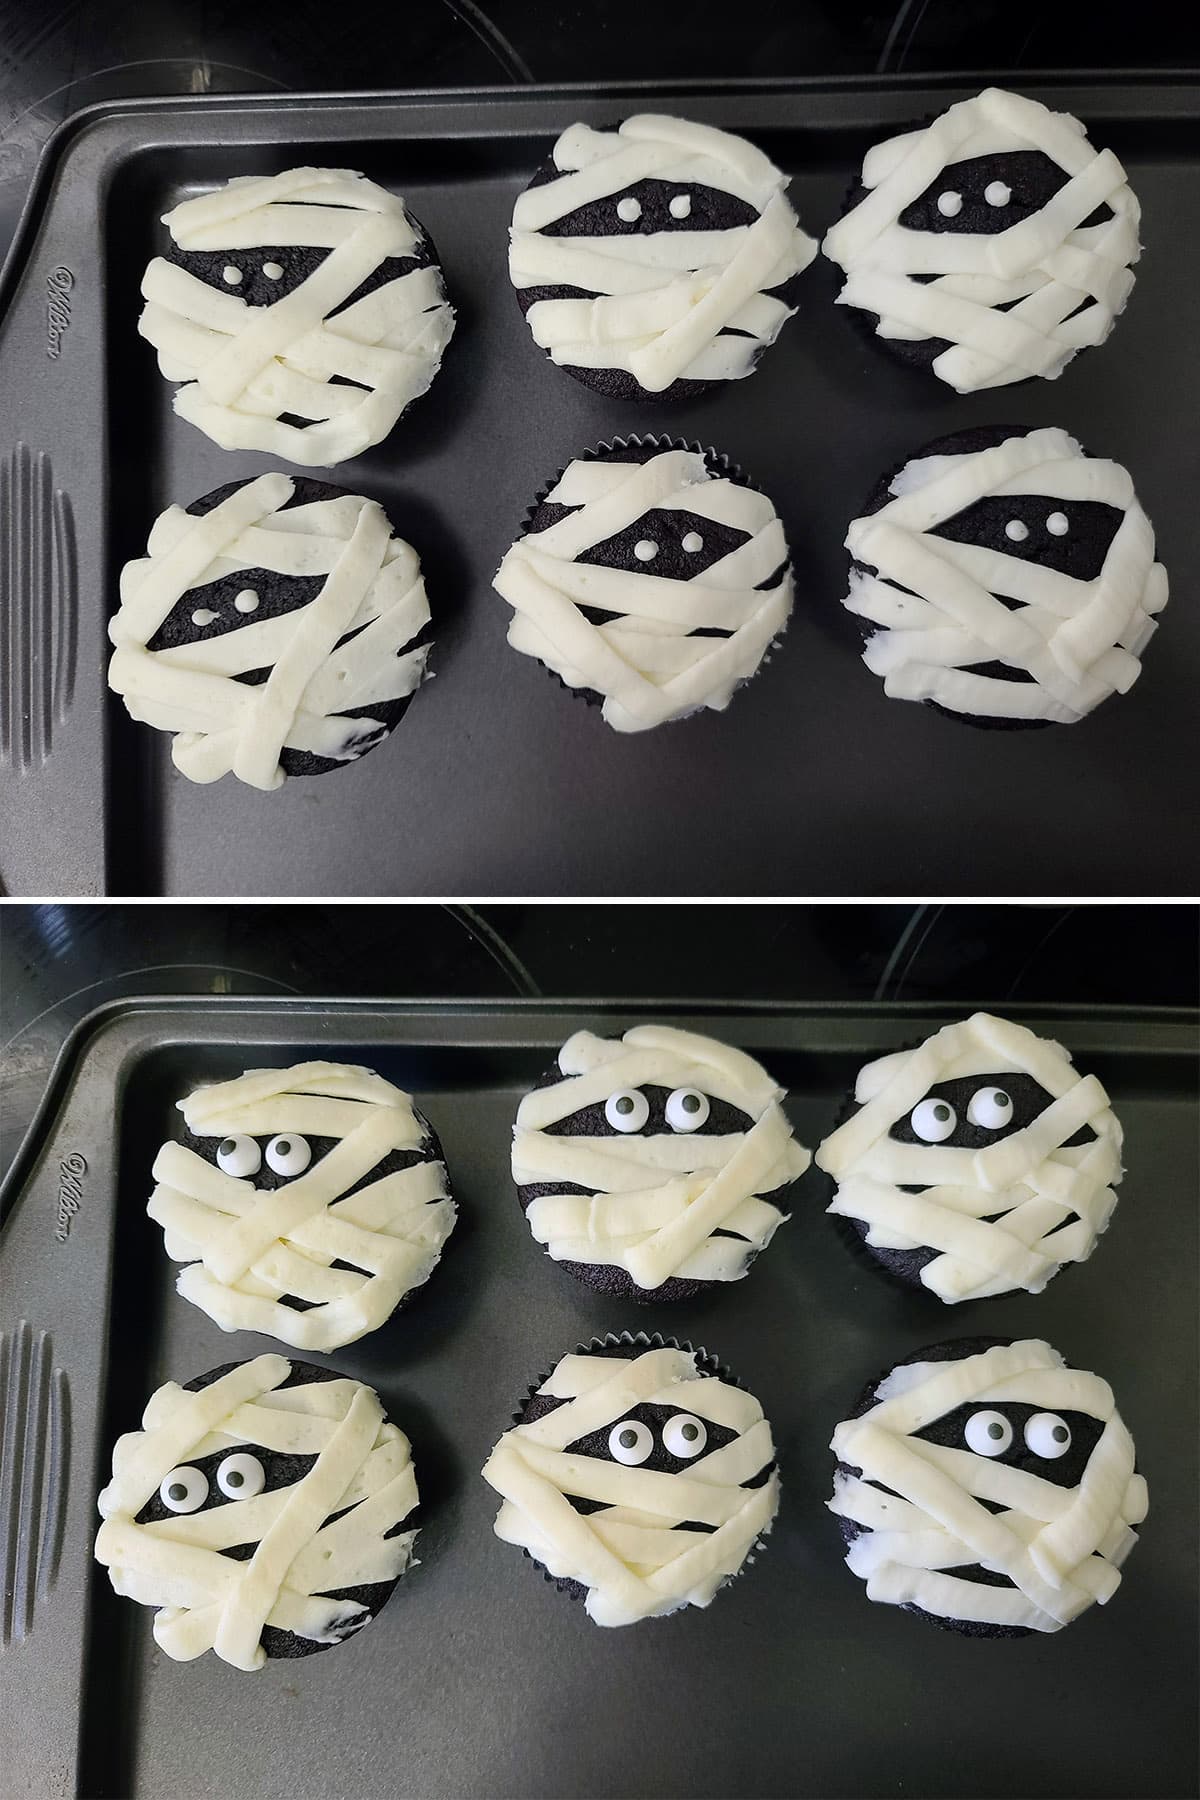 A 2 part image showing gluten free halloween cupcakes, mummy style, with candy eyes being added.